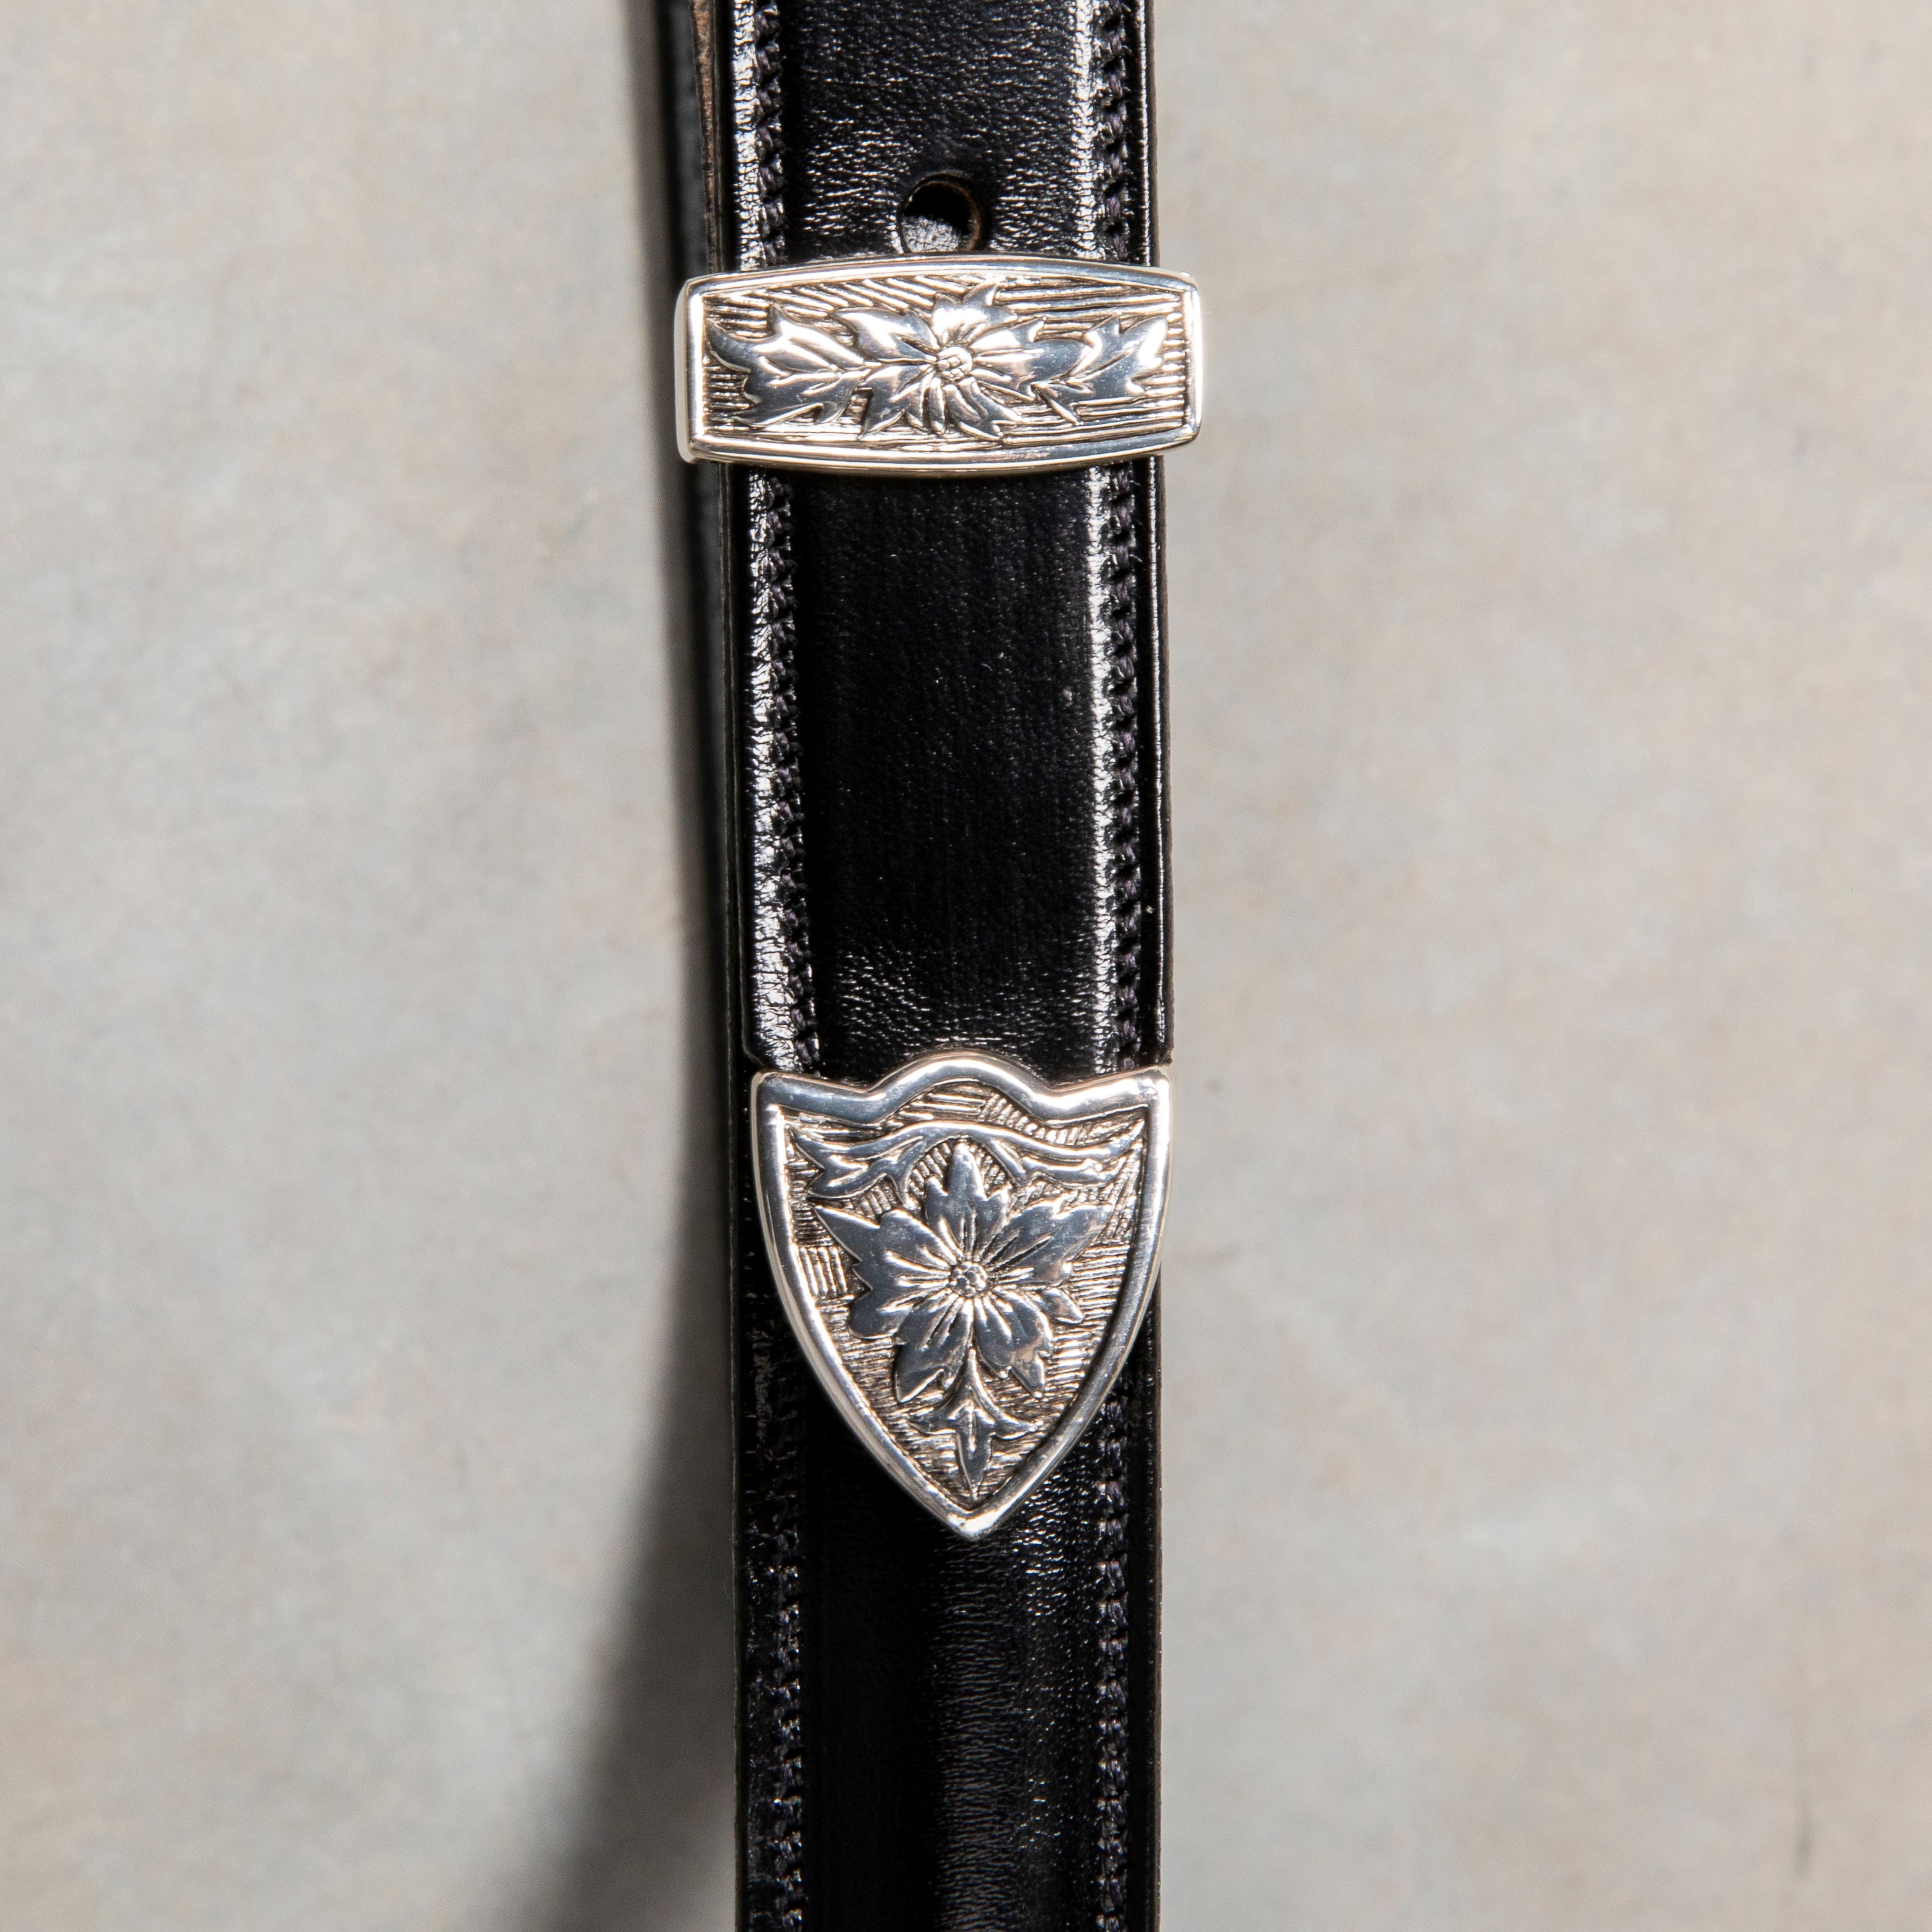 Tory Leather x Frans Boone Western Bridle Leather Belt 1″ Black